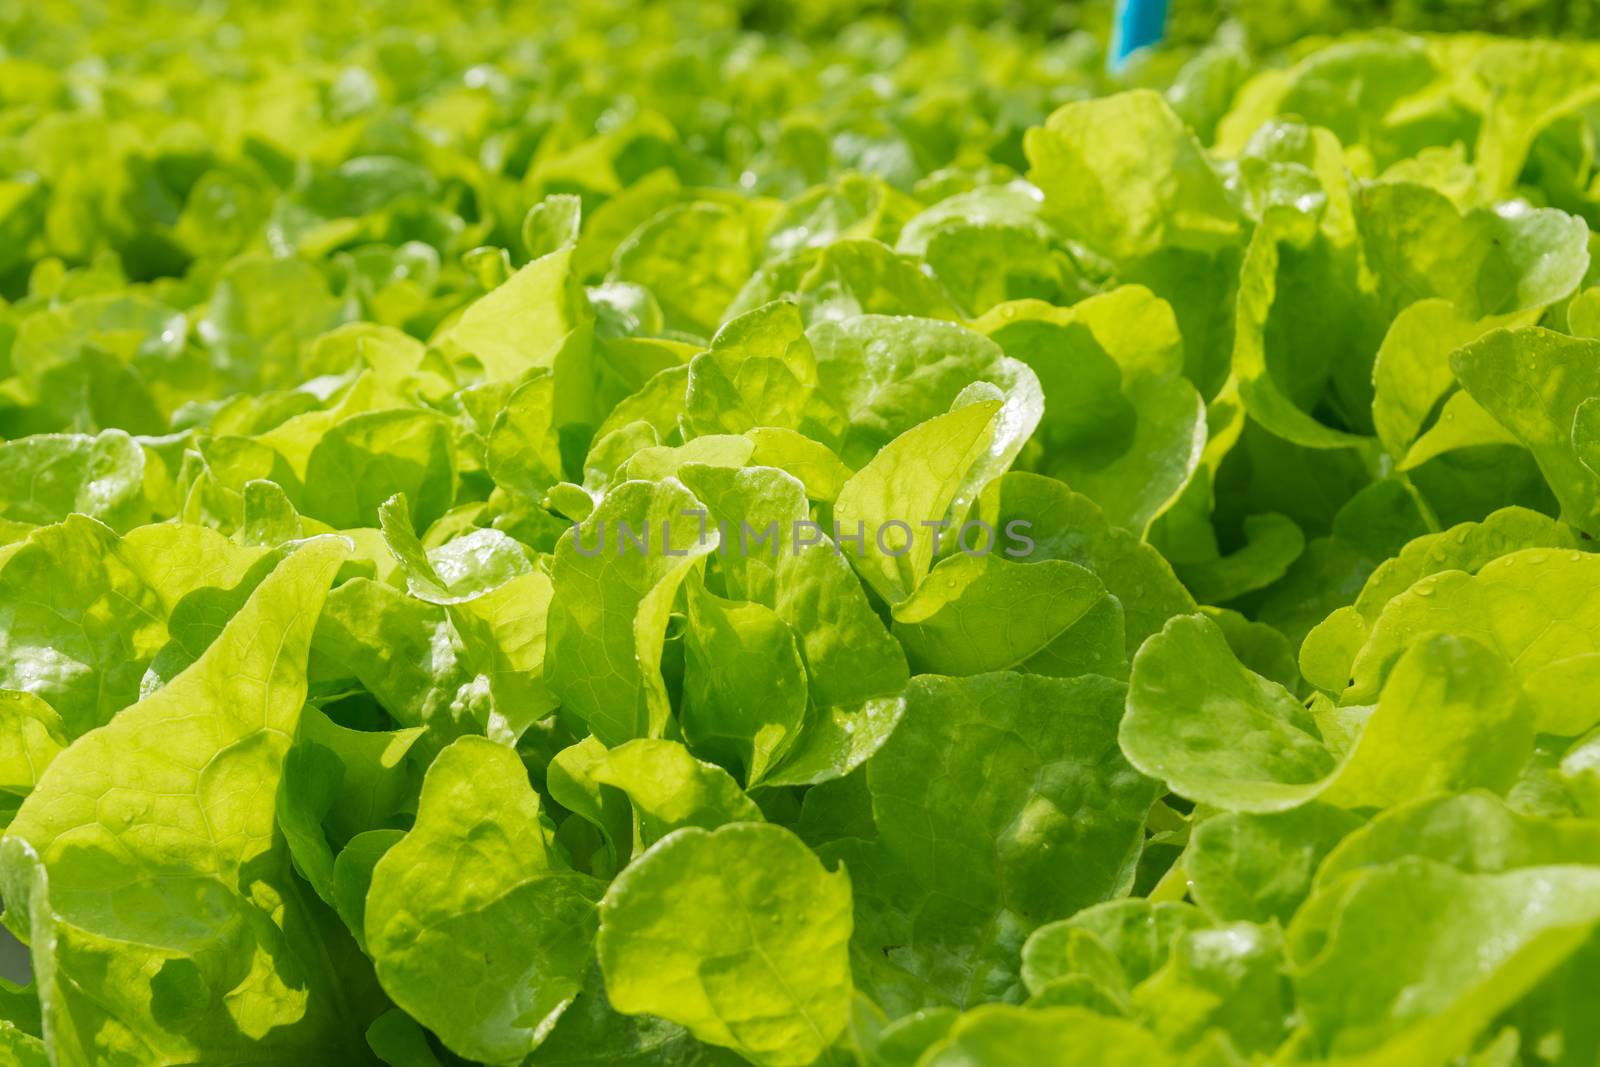 Fresh Green Oak Salad Lettuce Vegetable growing in Plastic Pipe in Hydroponic Organic Agricultural System Farming or Garden Plantation under Morning Sunshine in Asian as Modern Agriculture production